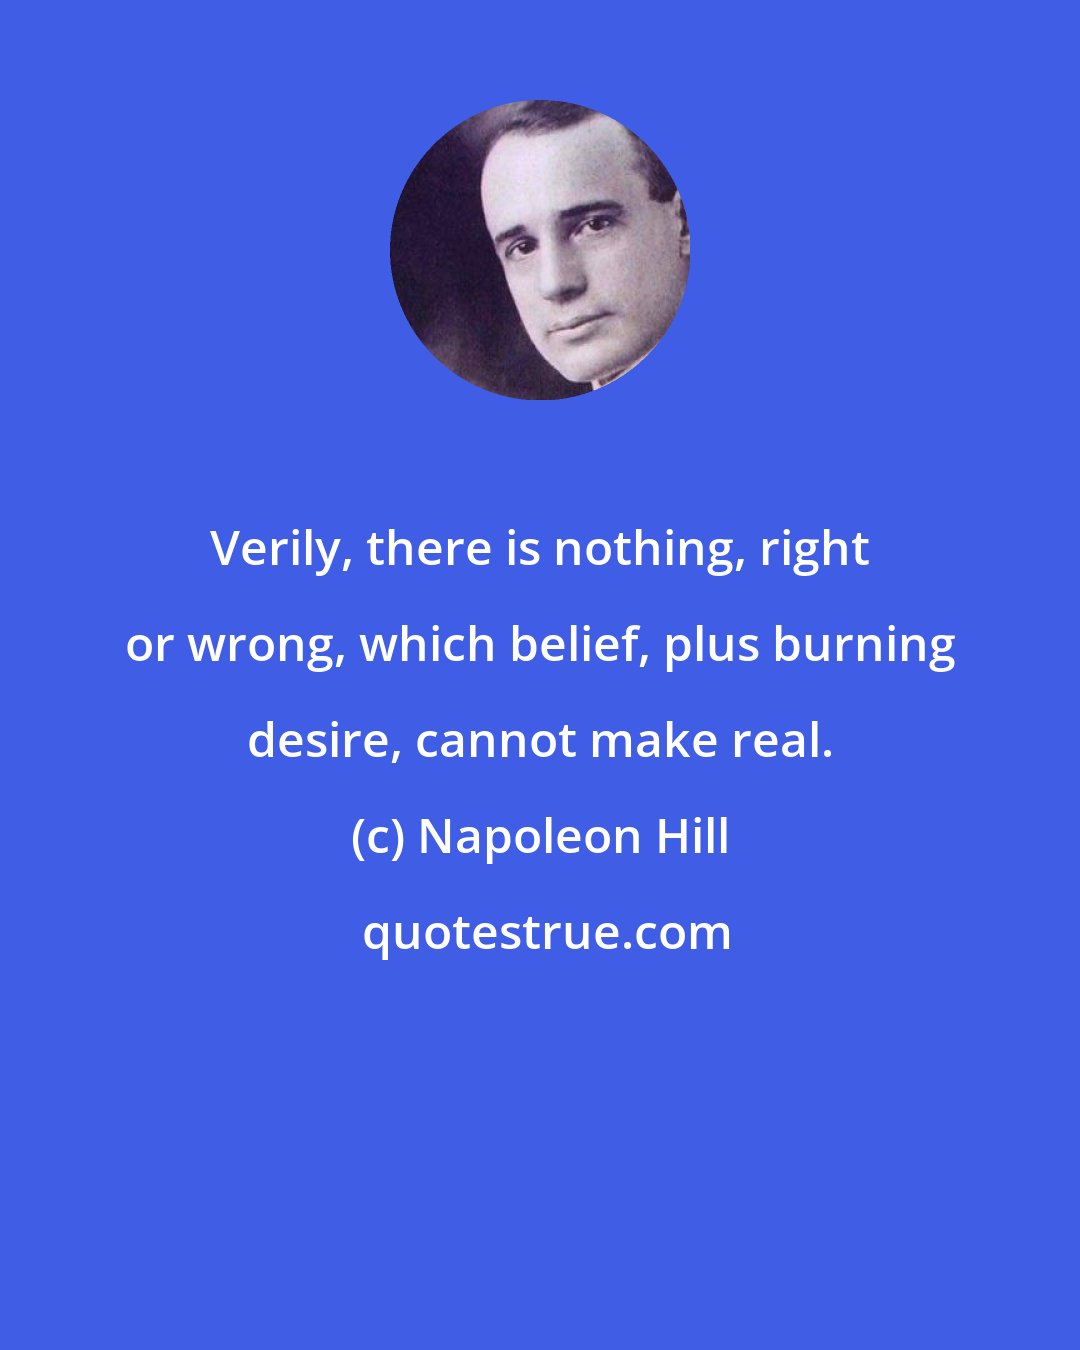 Napoleon Hill: Verily, there is nothing, right or wrong, which belief, plus burning desire, cannot make real.